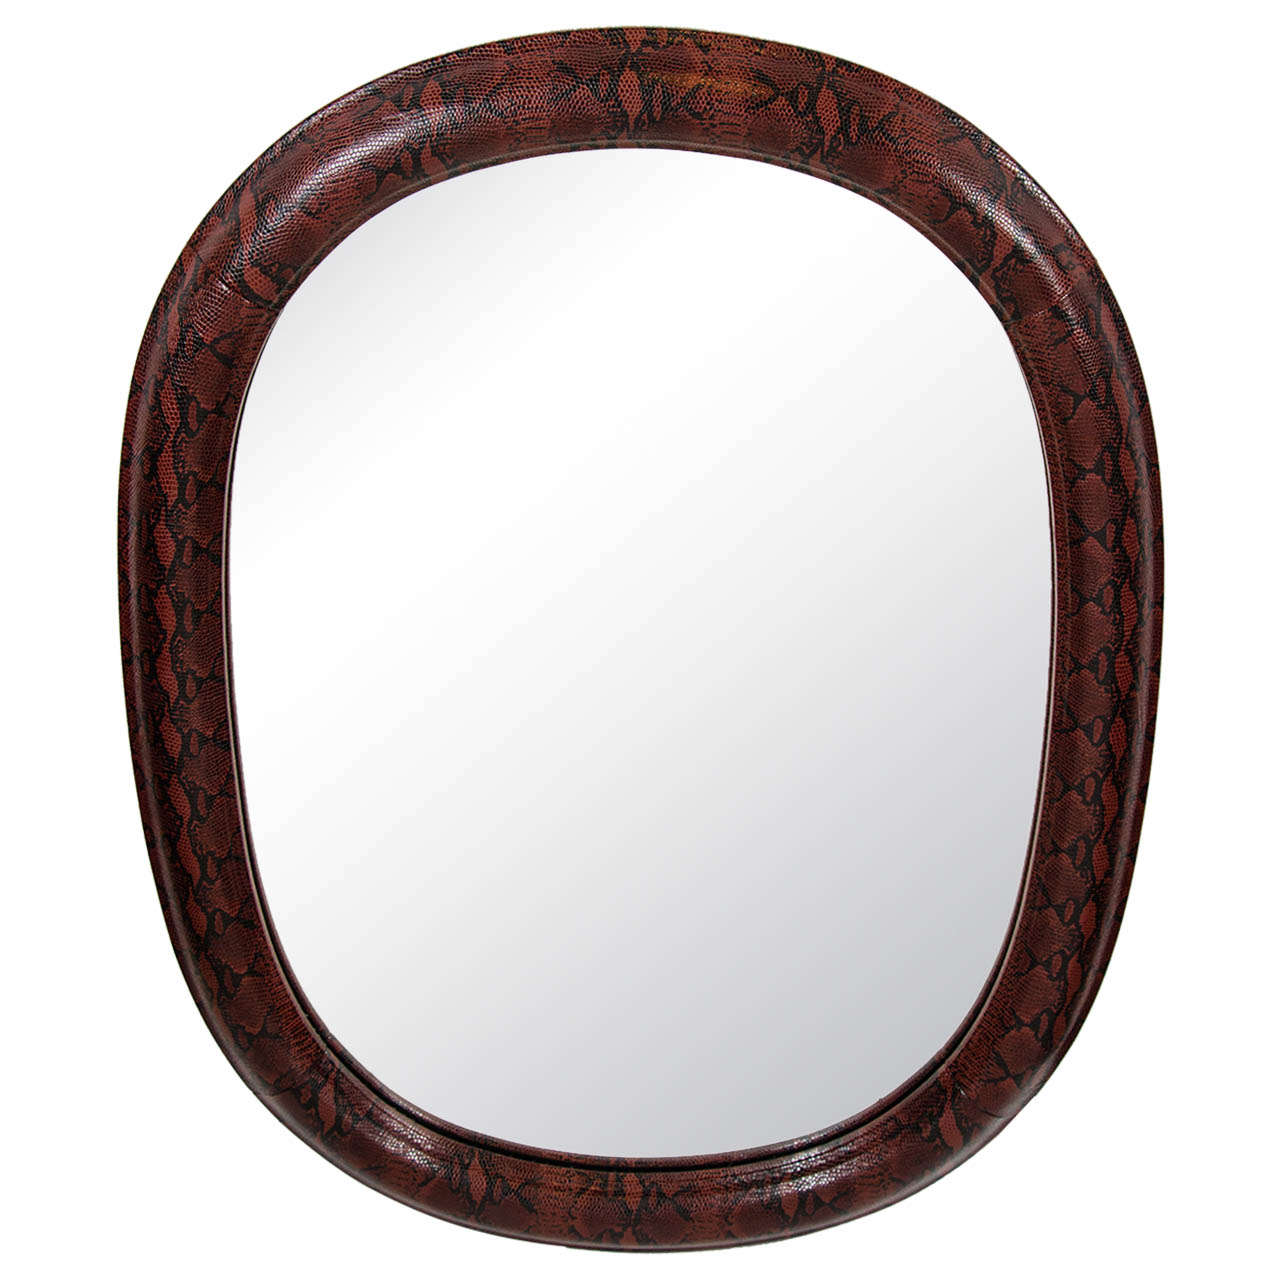 Stunning mid-century modern rounded mirror with slight oval form. Wrapped in red and black snakeskin print embossed leather. Leather over hand-carved wood with half round molded frame. In the style of Karl Springer.